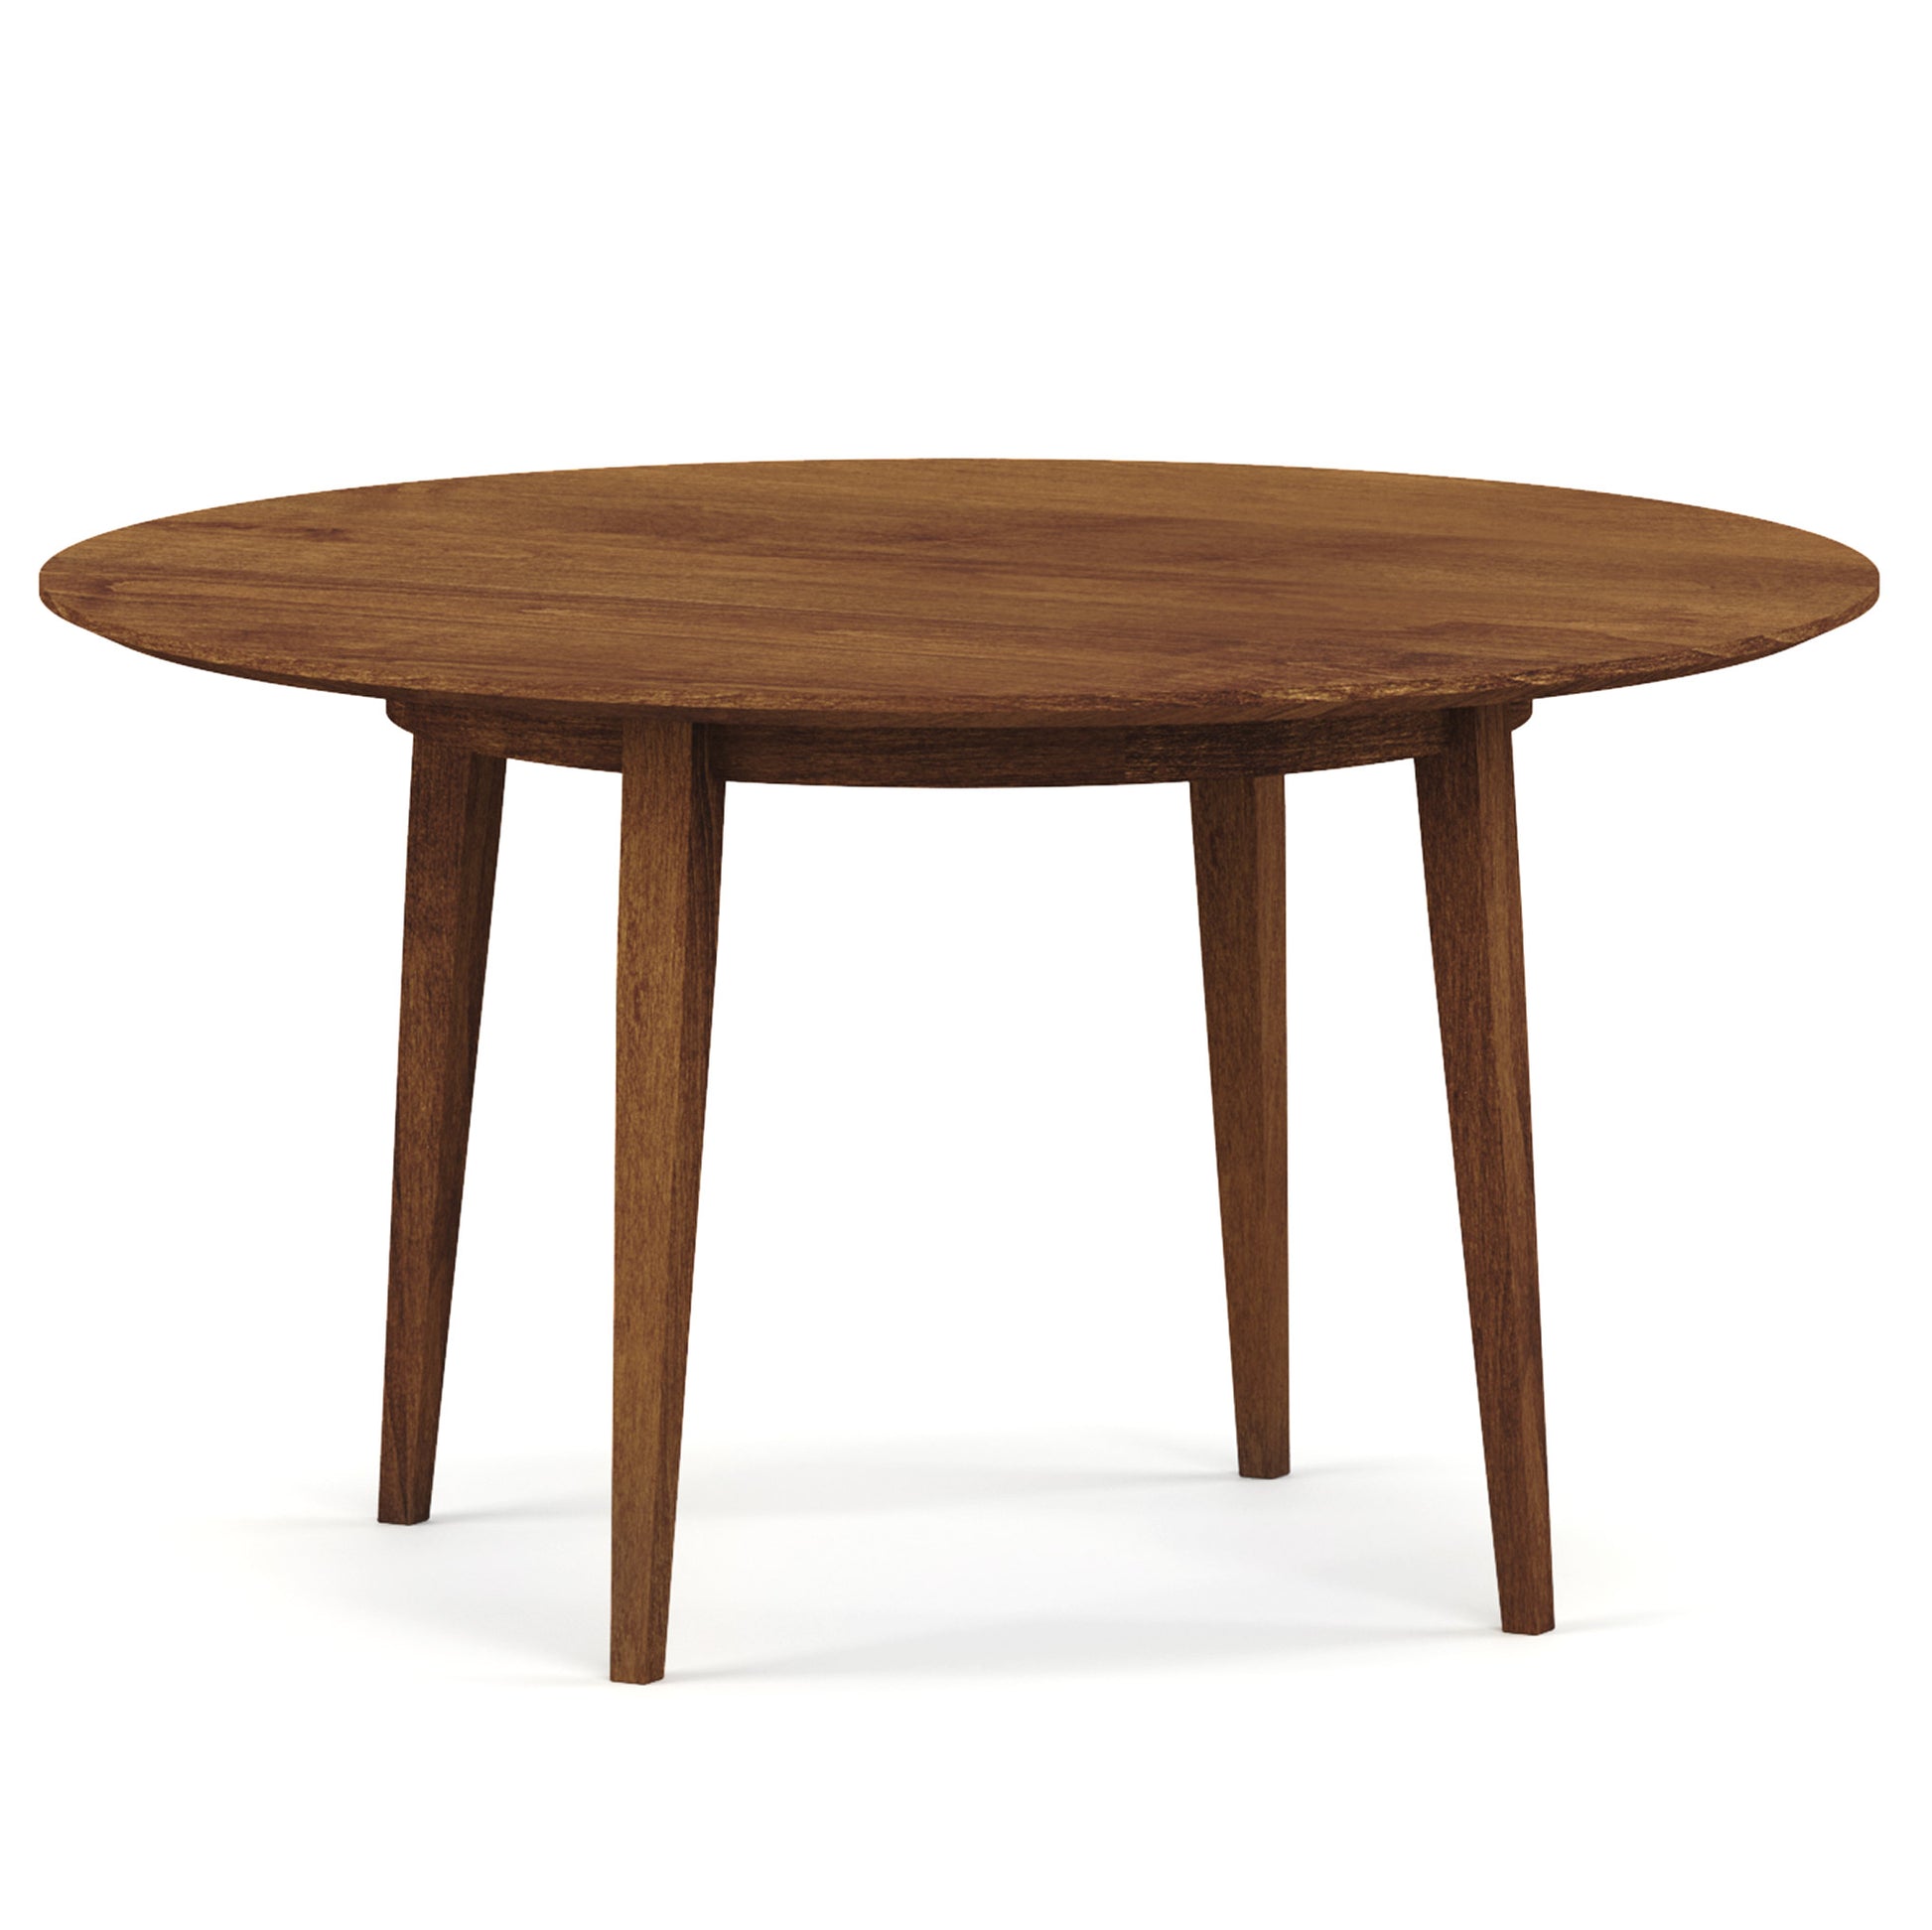 Gable Road 54-inch Round Dining Table - Stickley Furniture | Mattress